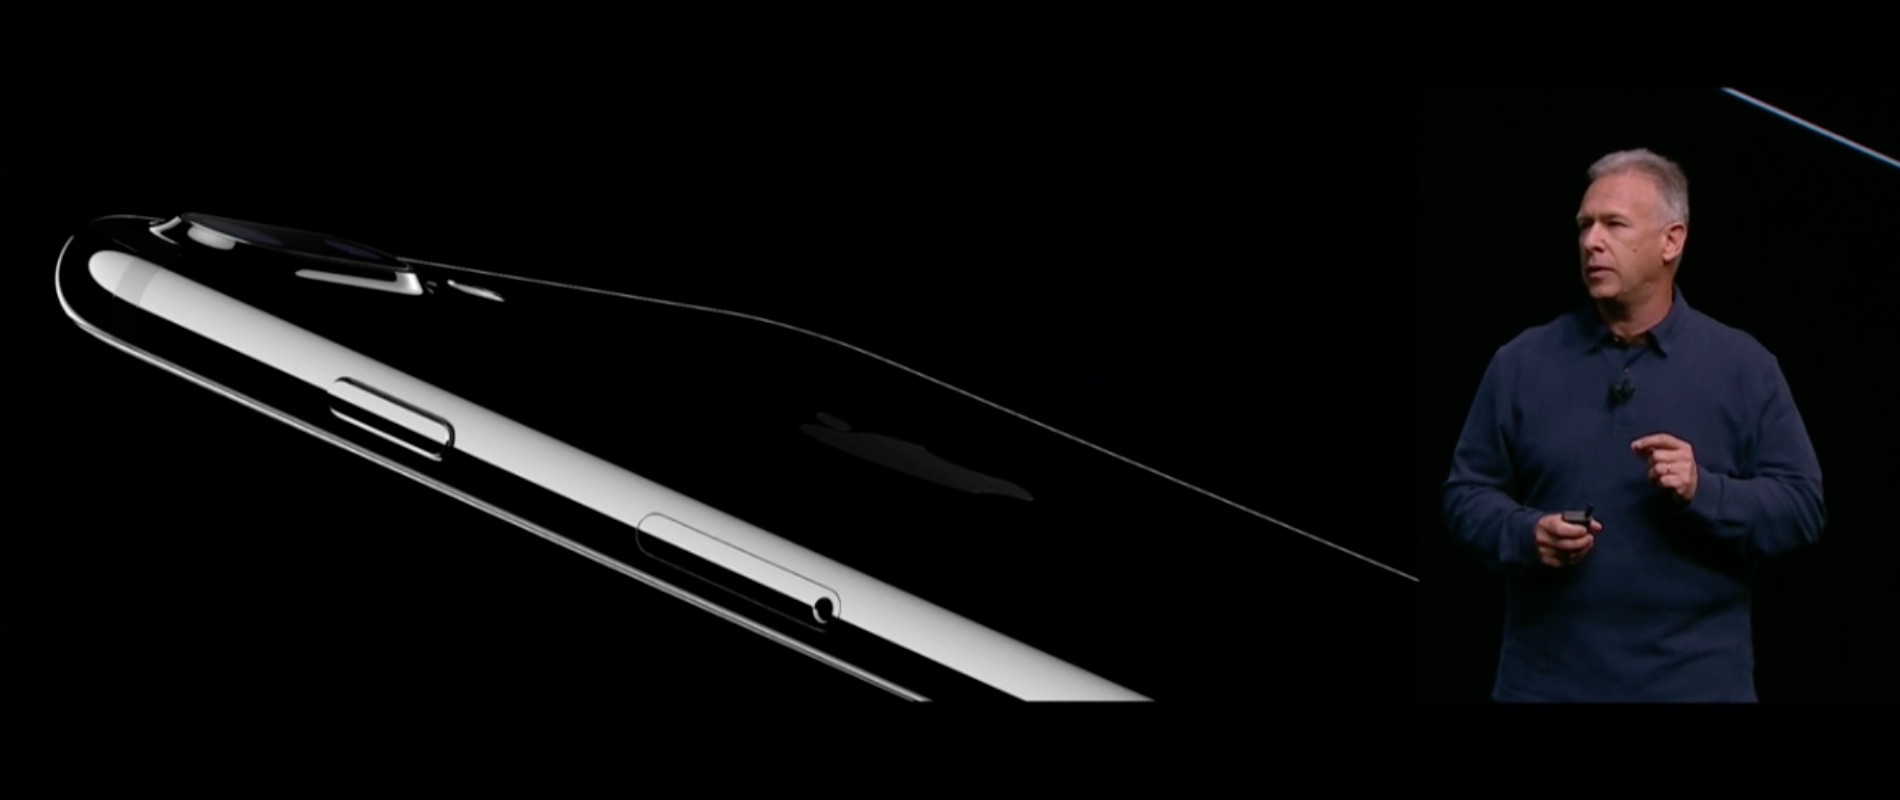 iphone7-plus-special-events-2016-sep-03